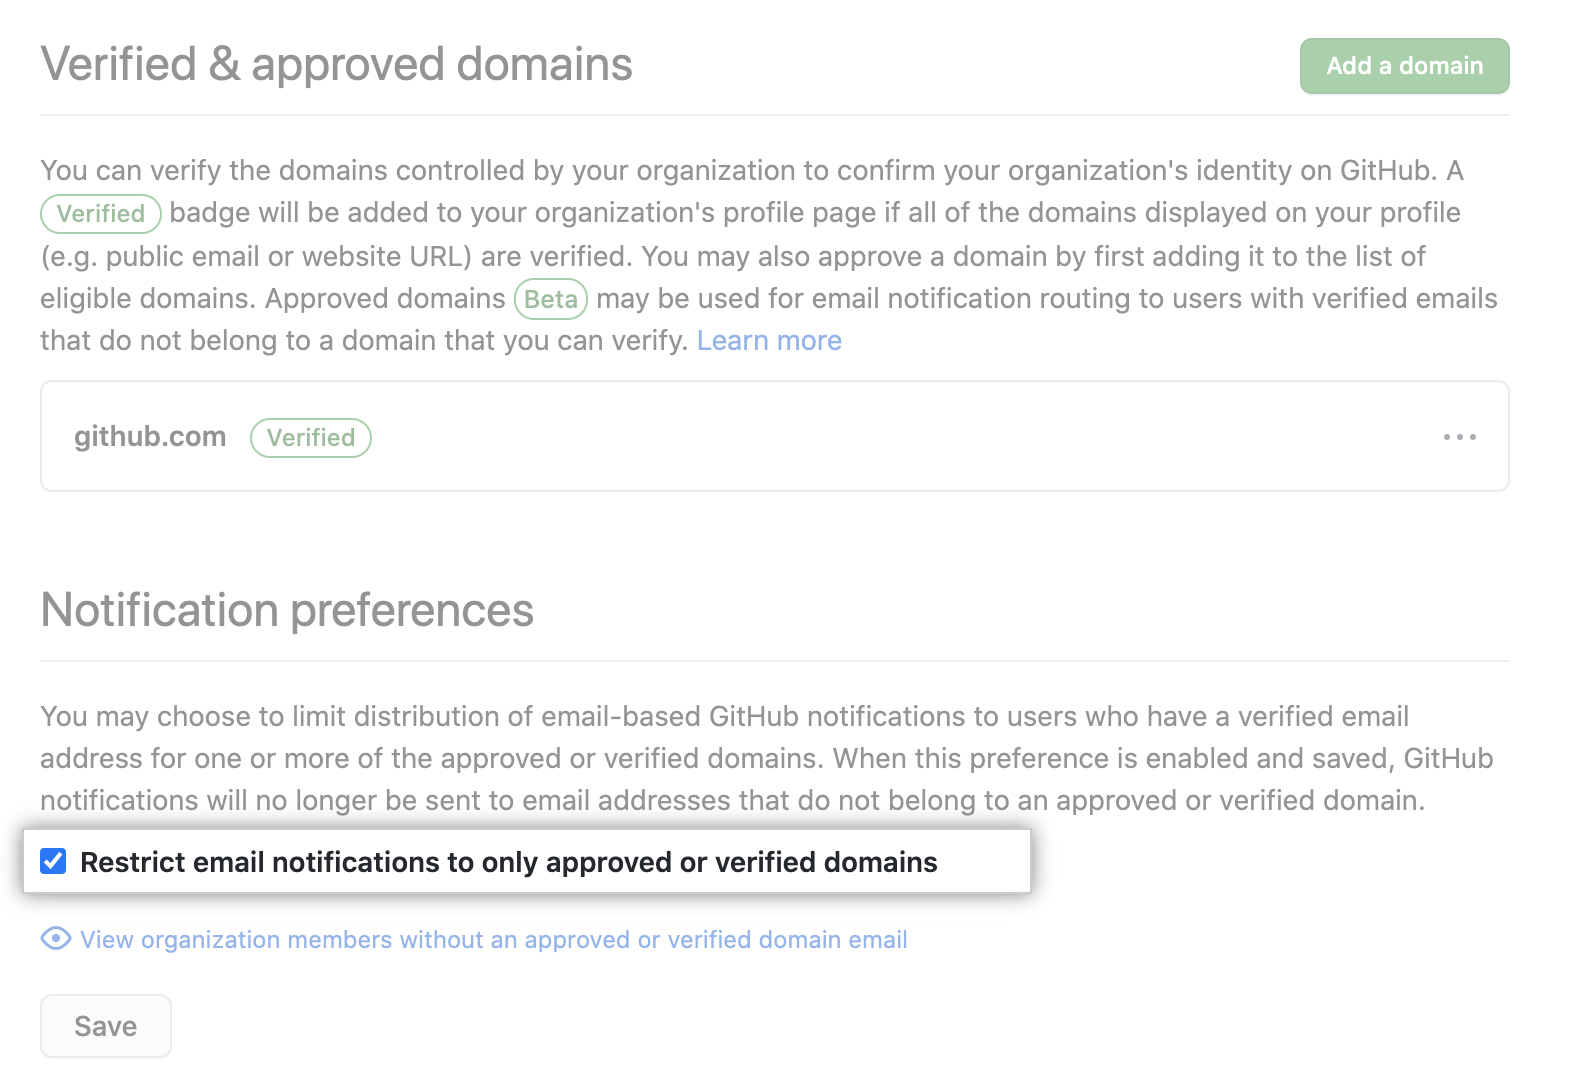 Checkbox to restrict email notifications to verified domain emails